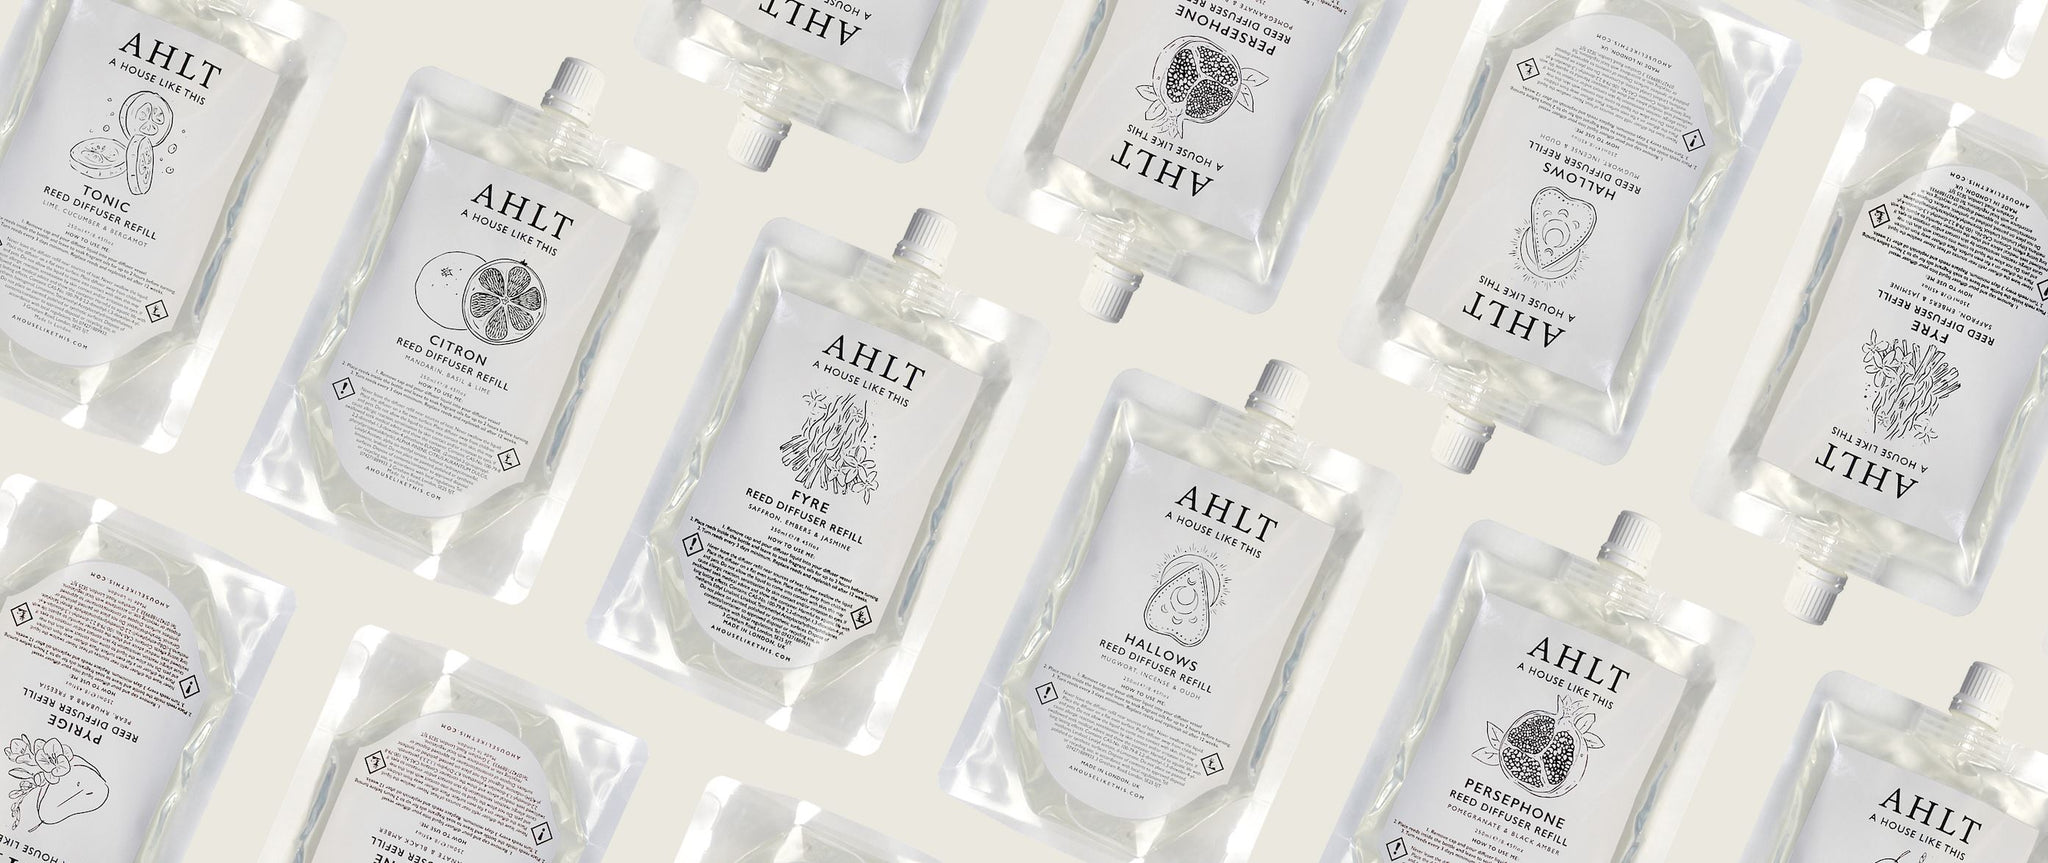 AHLT's More Mindful Reed Diffuser Refill Pouches